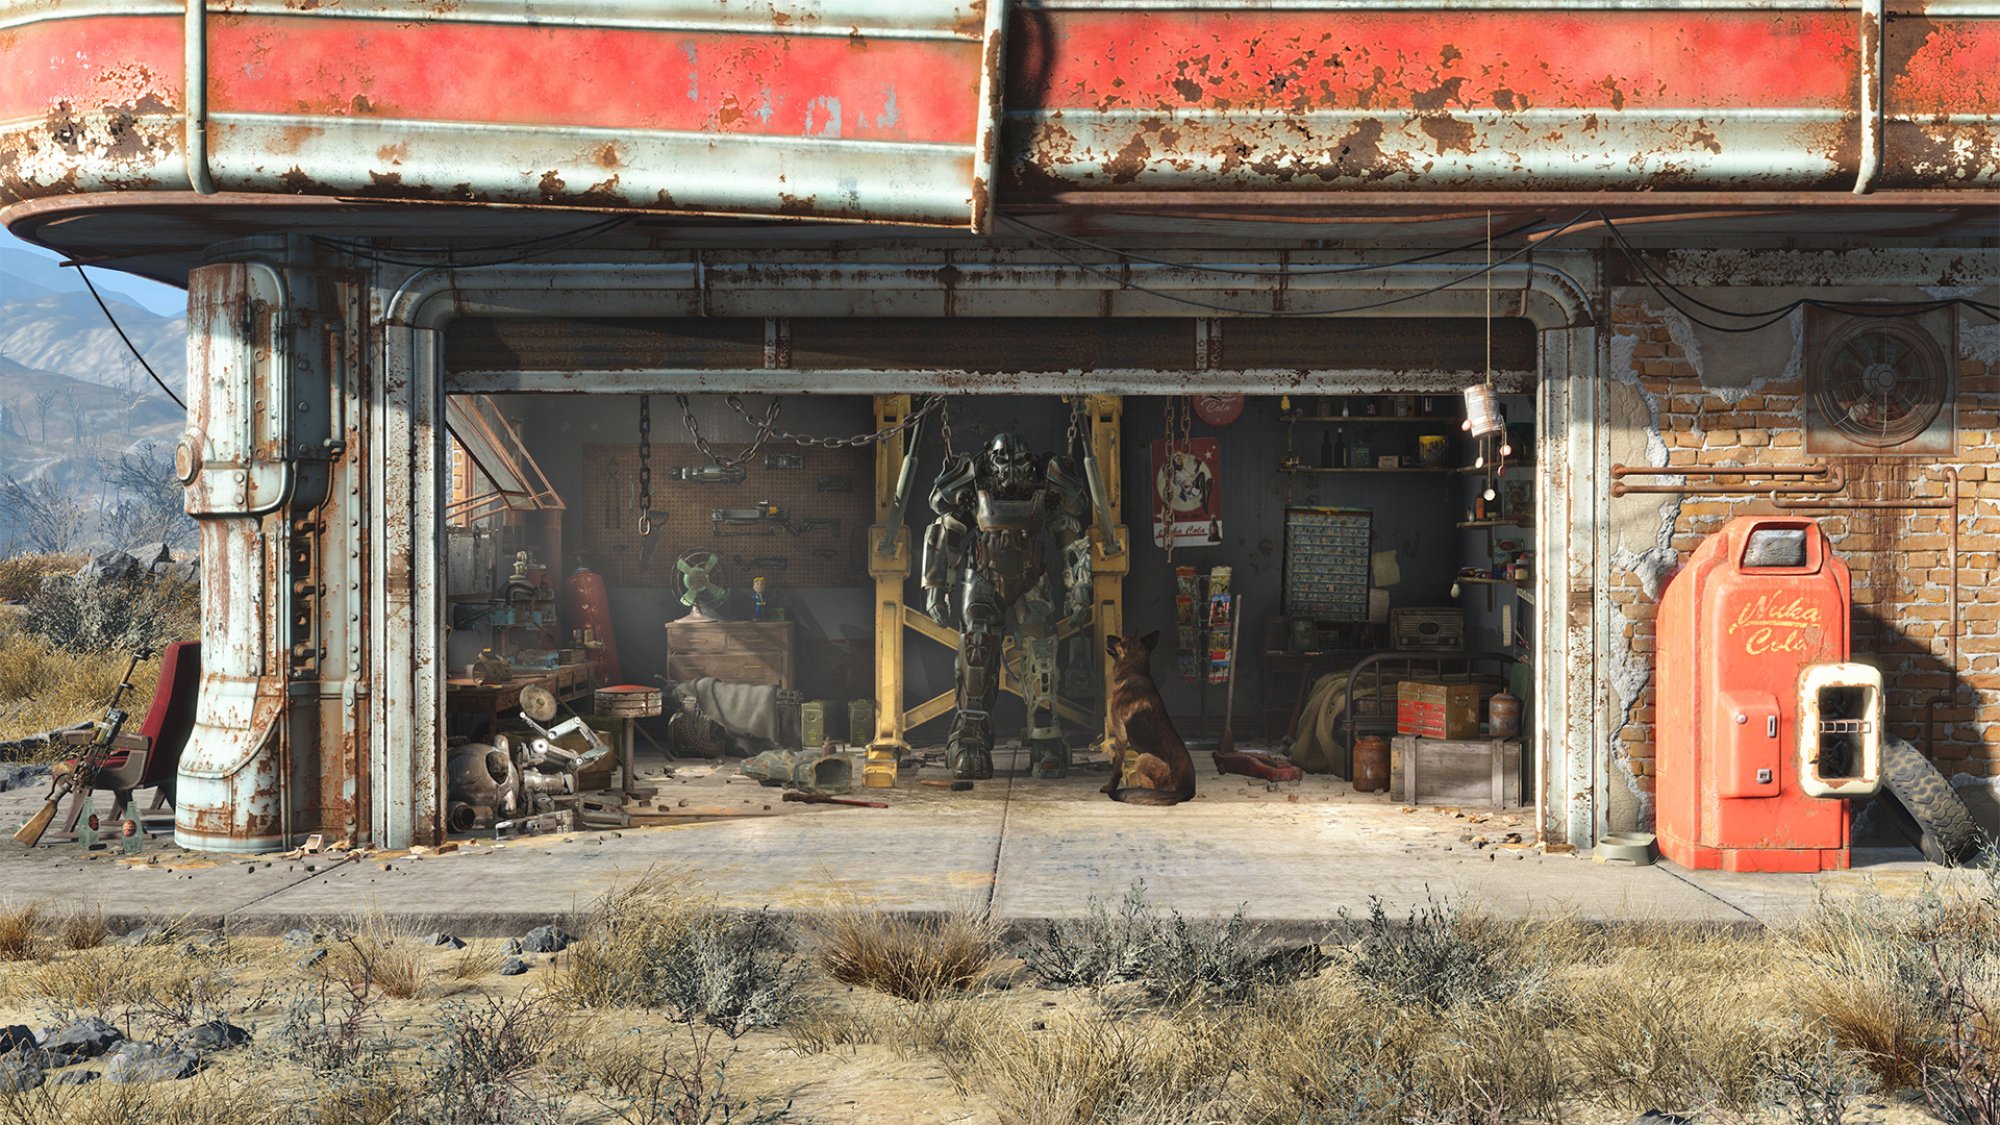 A still from "Fallout 4" showing T-60 power armor sitting in a garage.